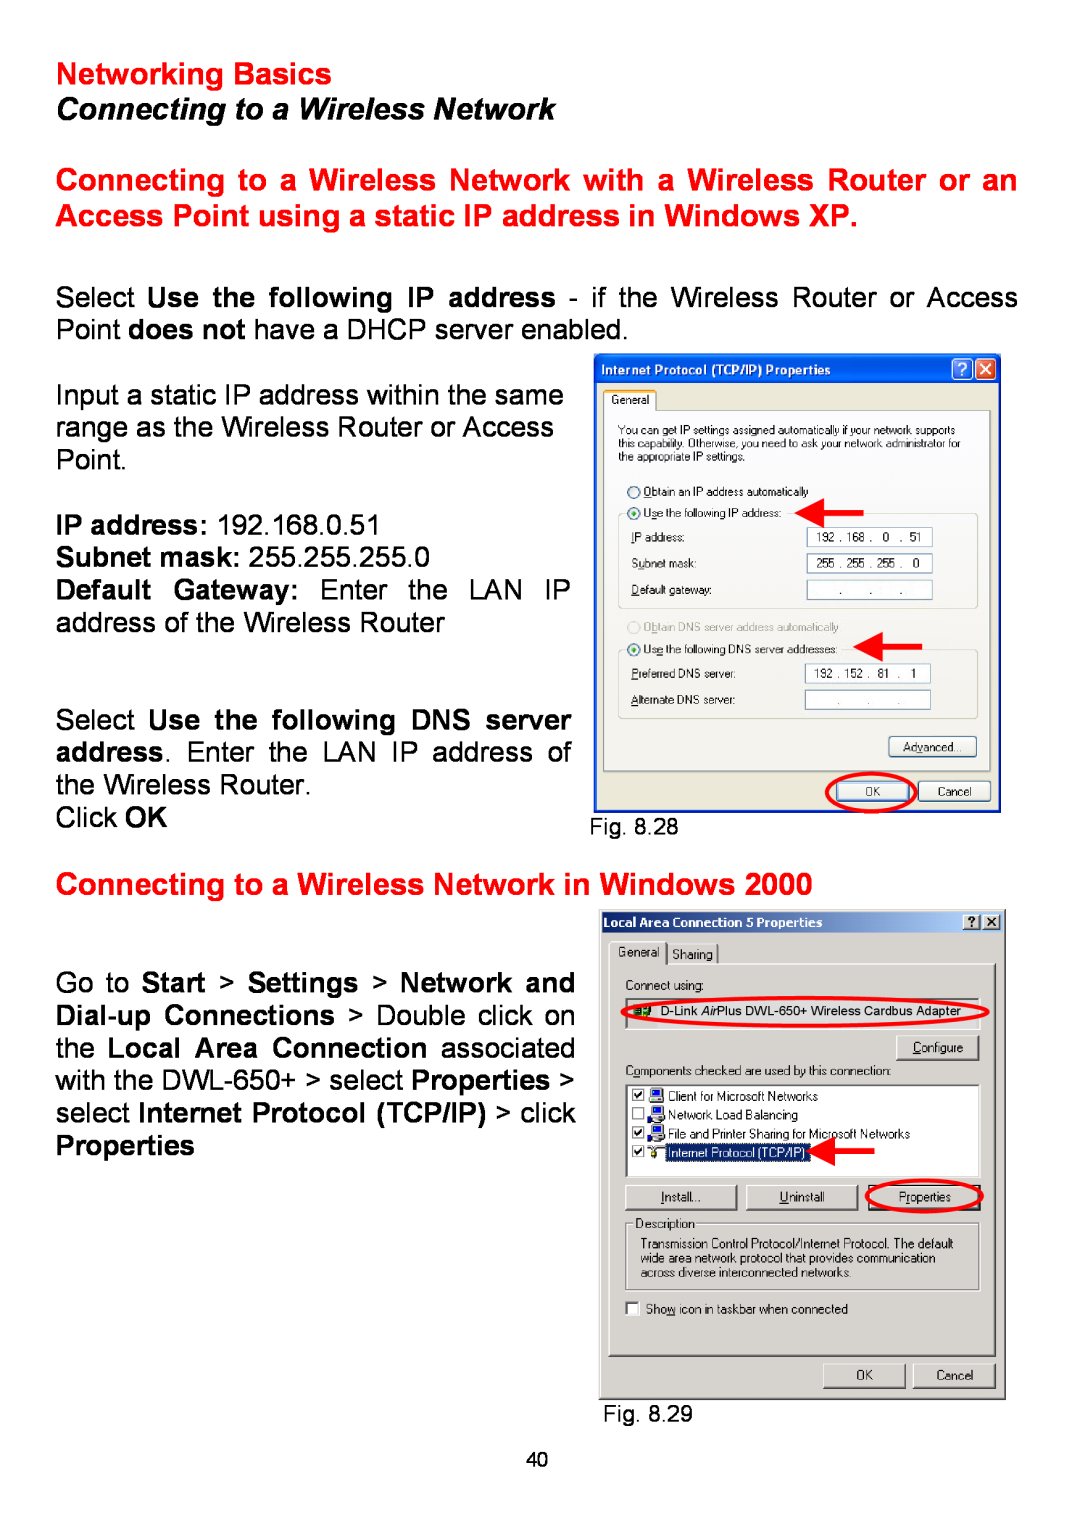 D-Link DWL-650+ Connecting to a Wireless Network in Windows, IP address Subnet mask, Networking Basics, Properties 